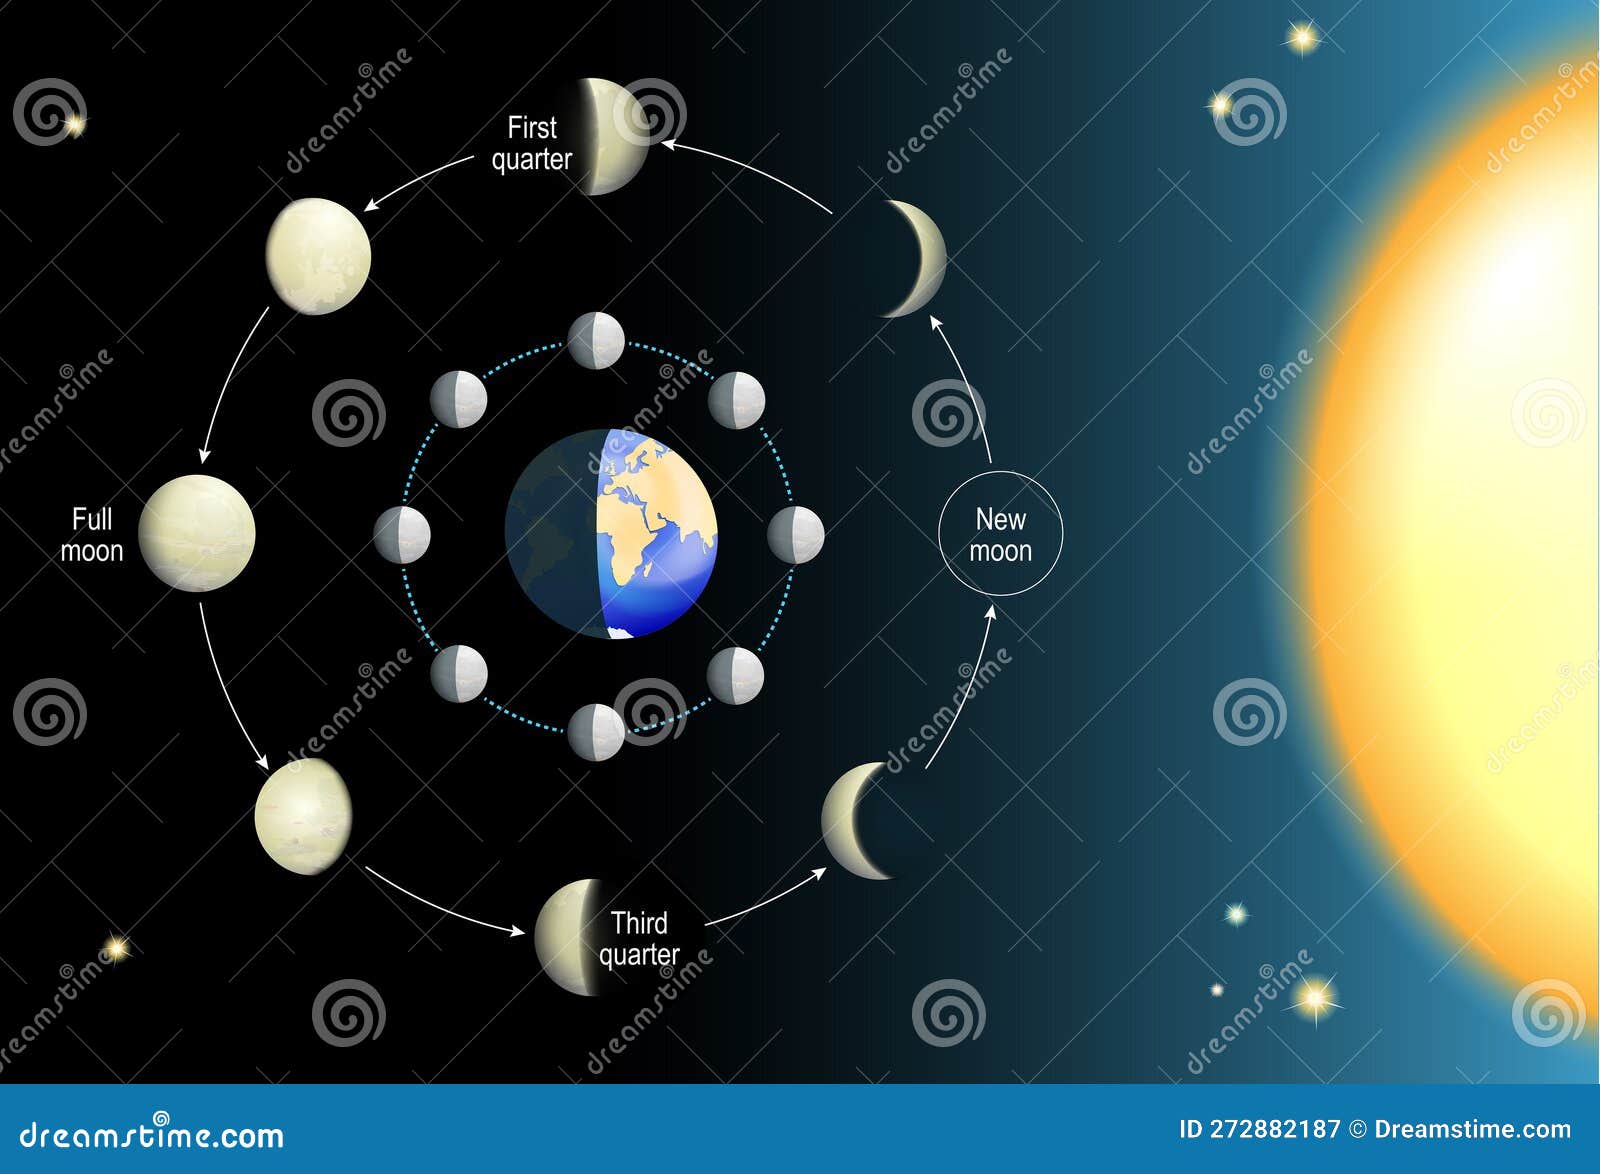 https://thumbs.dreamstime.com/z/lunar-phase-moon-cycle-phases-depends-s-position-orbit-around-earth-sun-movements-realistic-vector-illustration-272882187.jpg